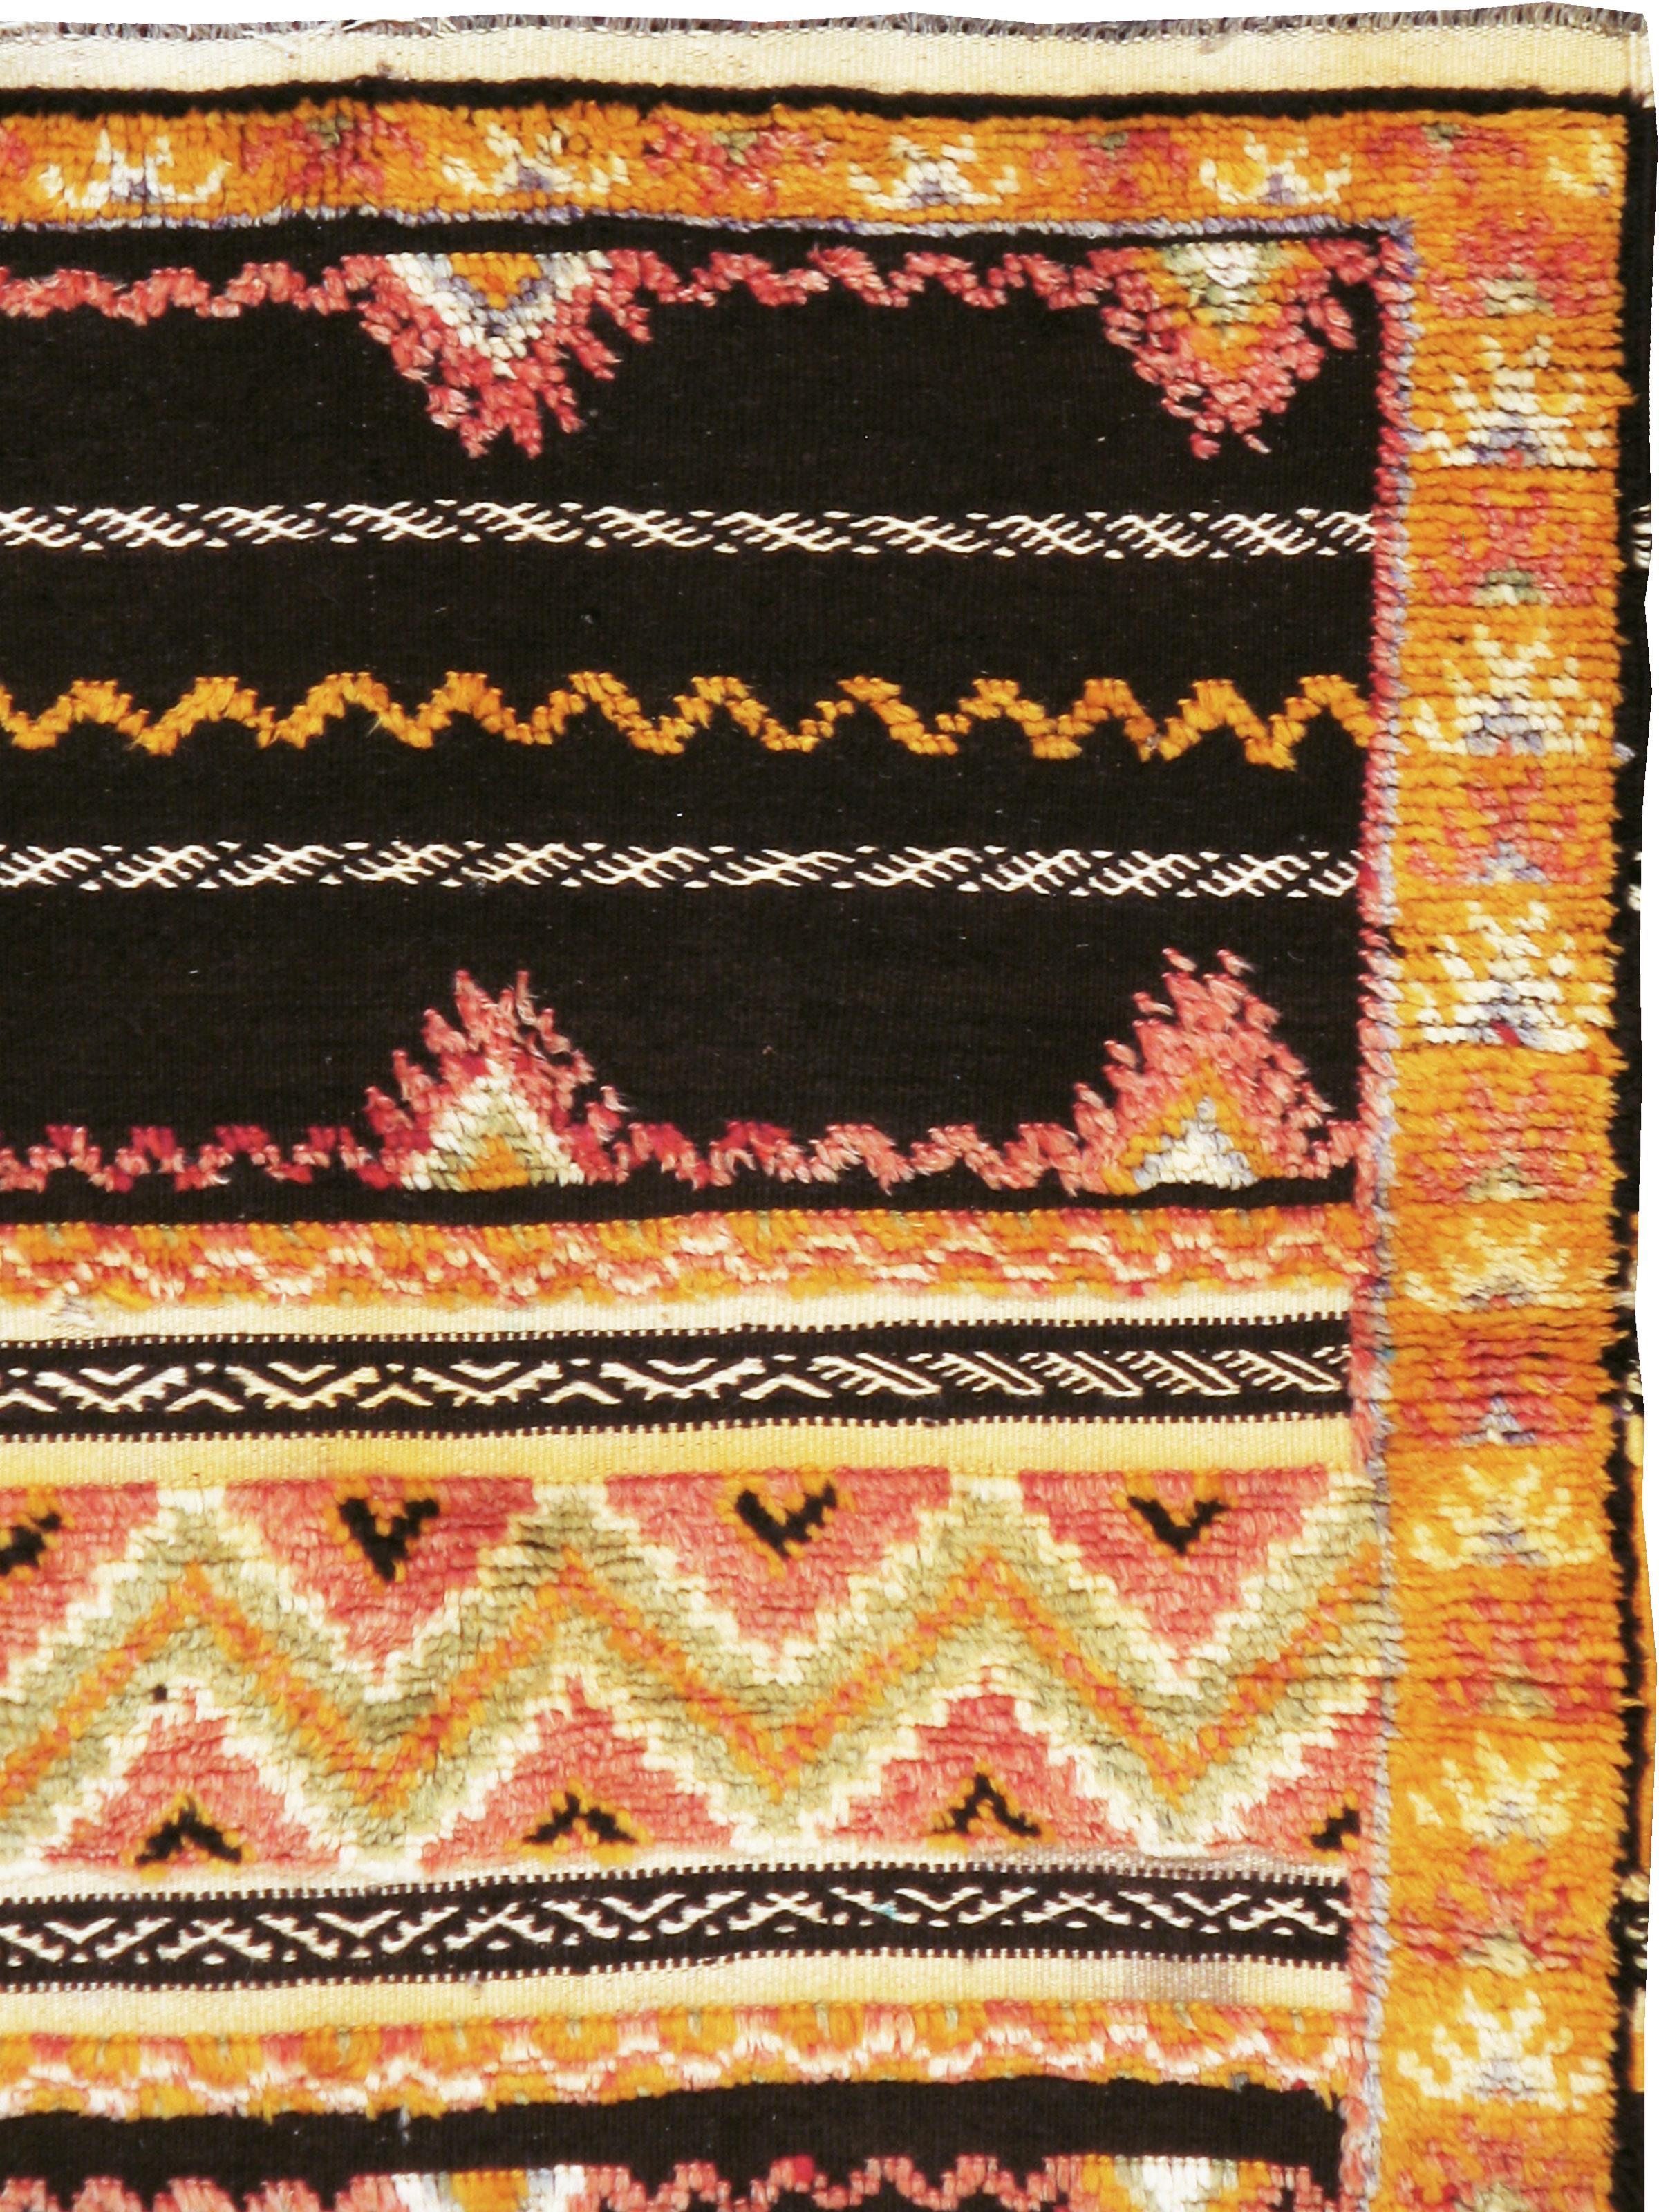 A modern Moroccan flat-woven carpet with a raised pile (known as souf) from the fourth quarter of the 20th century.